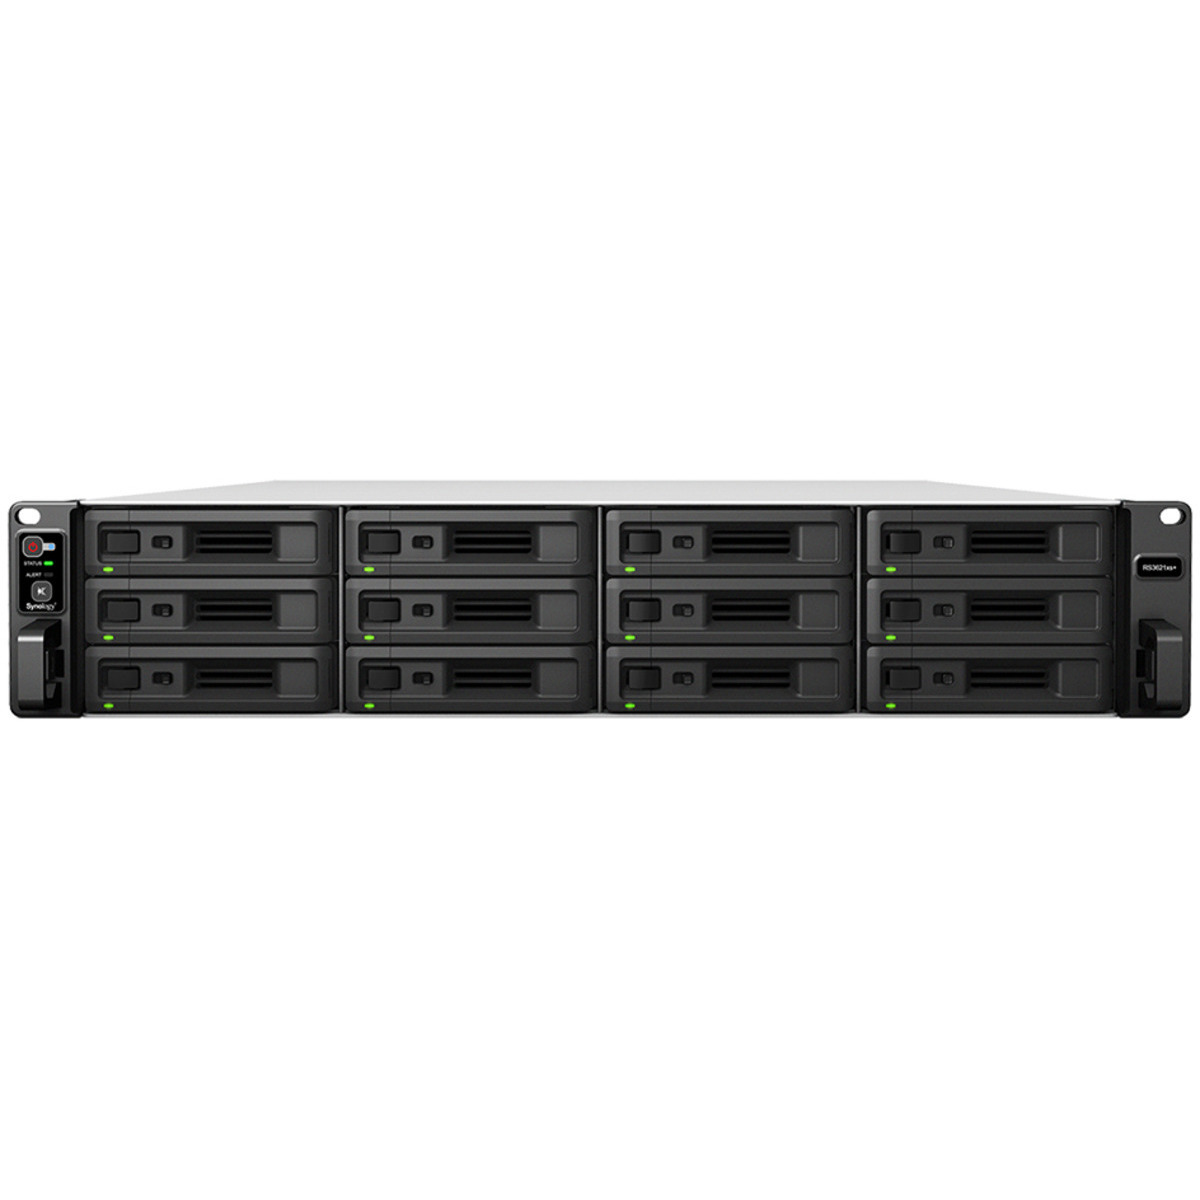 Synology RackStation RS3621xs+ 100tb 12-Bay RackMount Large Business / Enterprise NAS - Network Attached Storage Device 10x10tb Western Digital Gold WD102KRYZ 3.5 7200rpm SATA 6Gb/s HDD ENTERPRISE Class Drives Installed - Burn-In Tested RackStation RS3621xs+